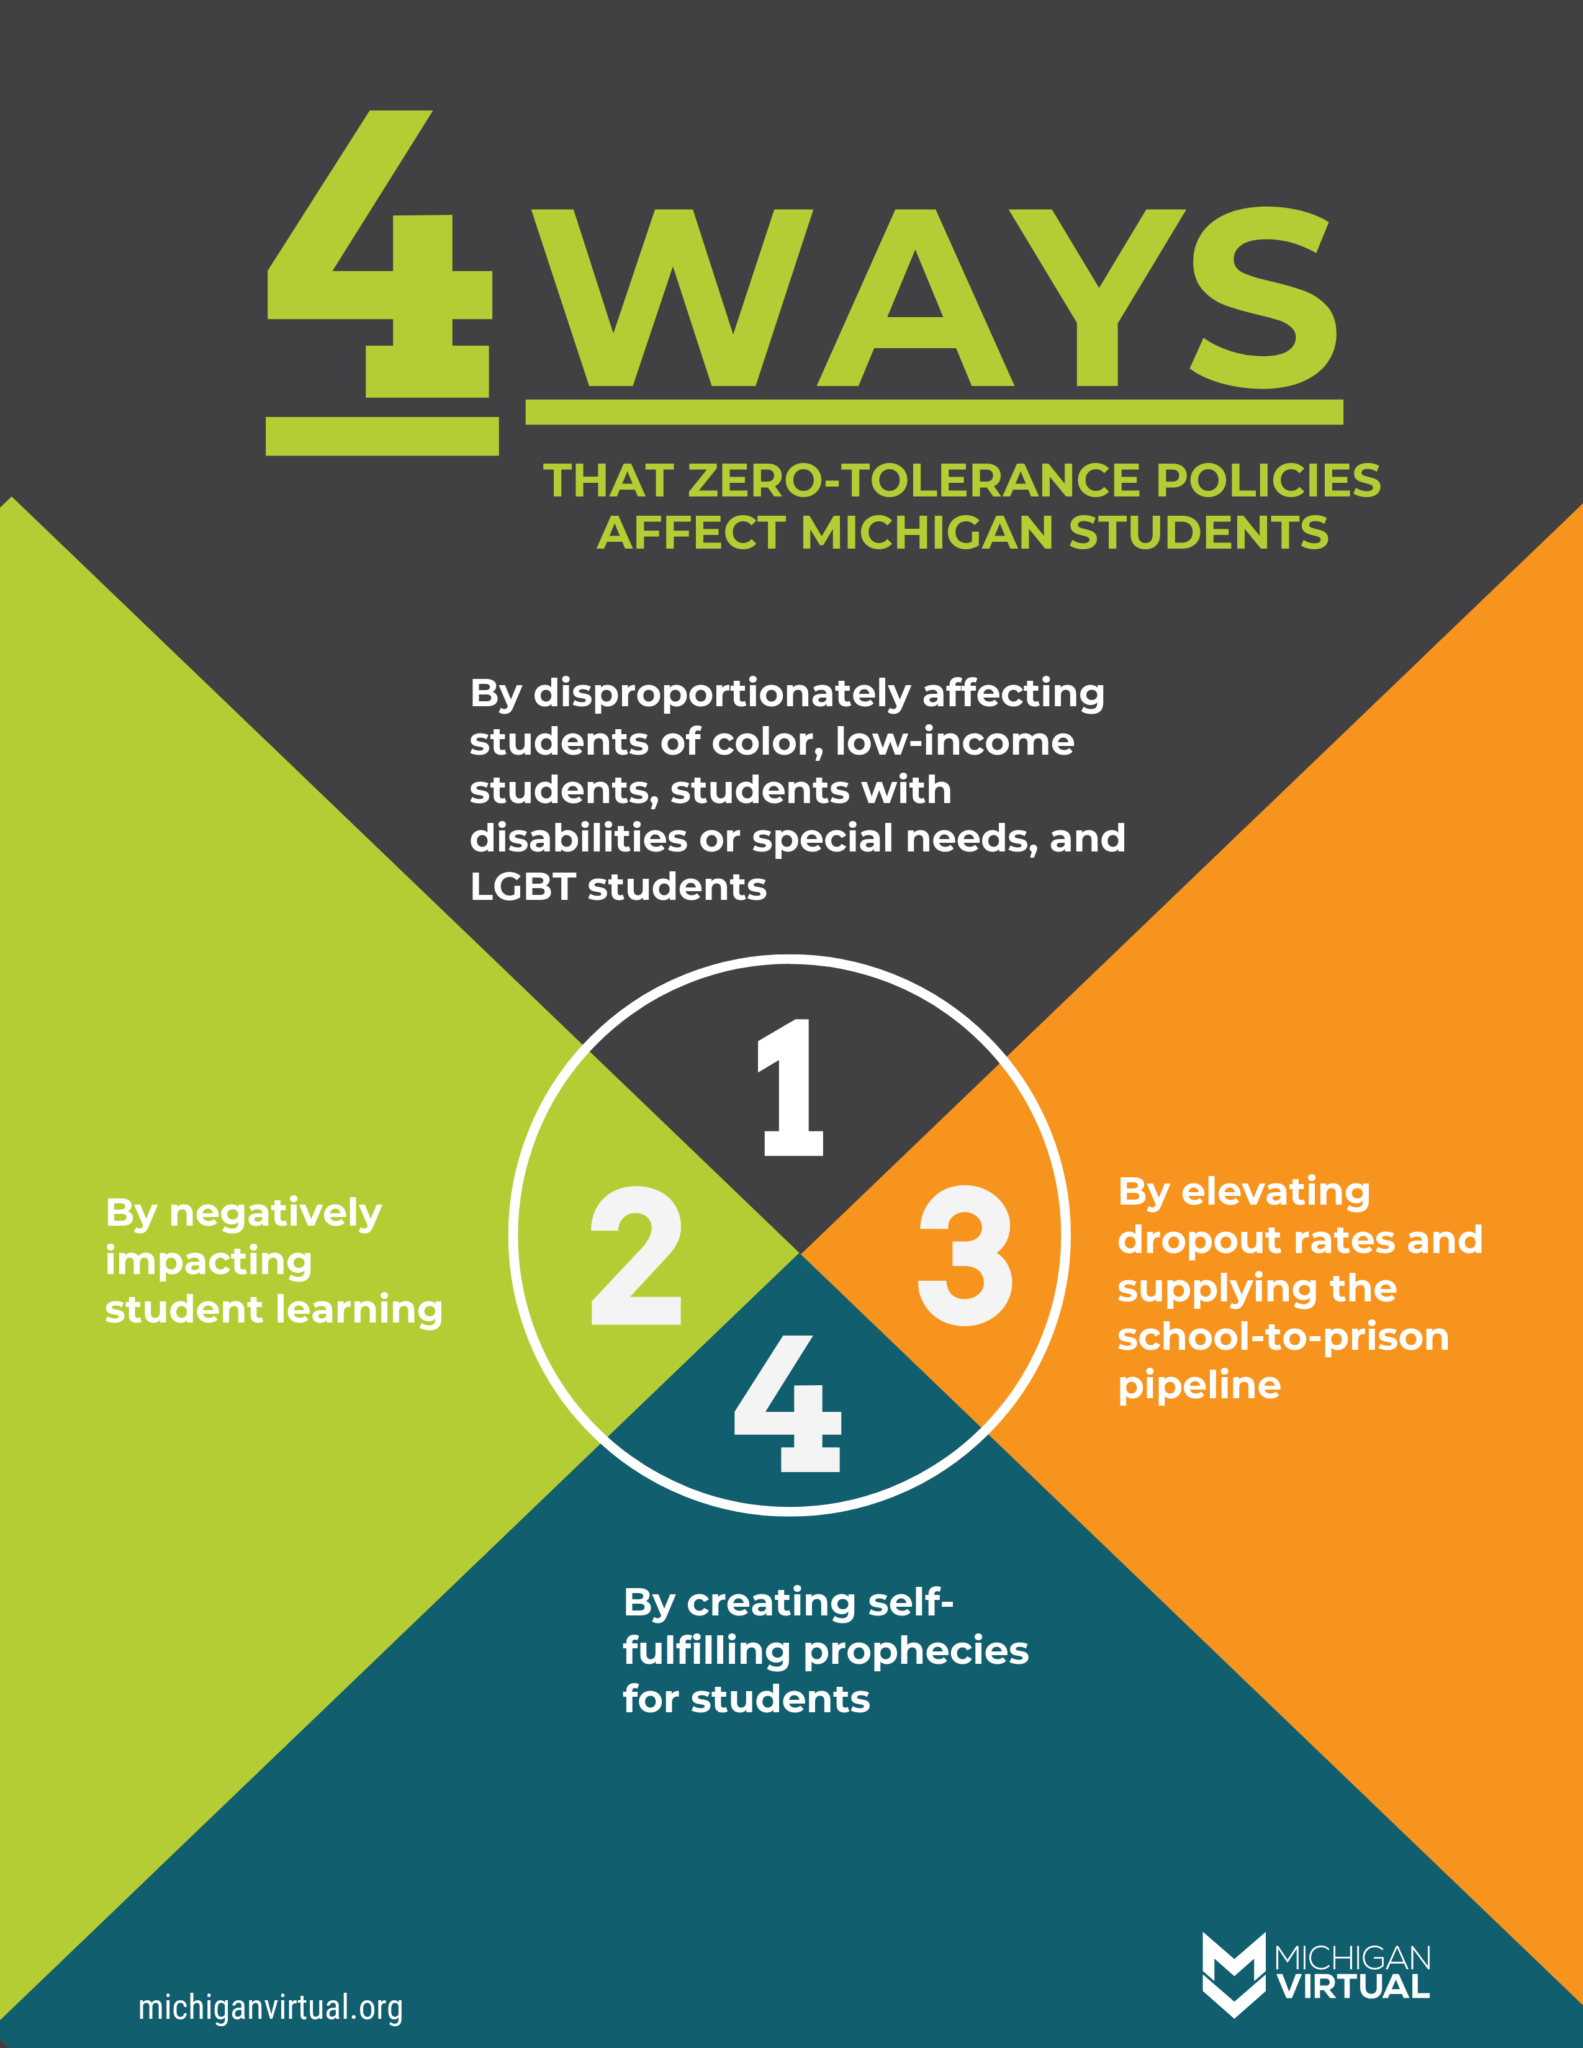 4 ways that zero tolerance policies affect Michigan students with